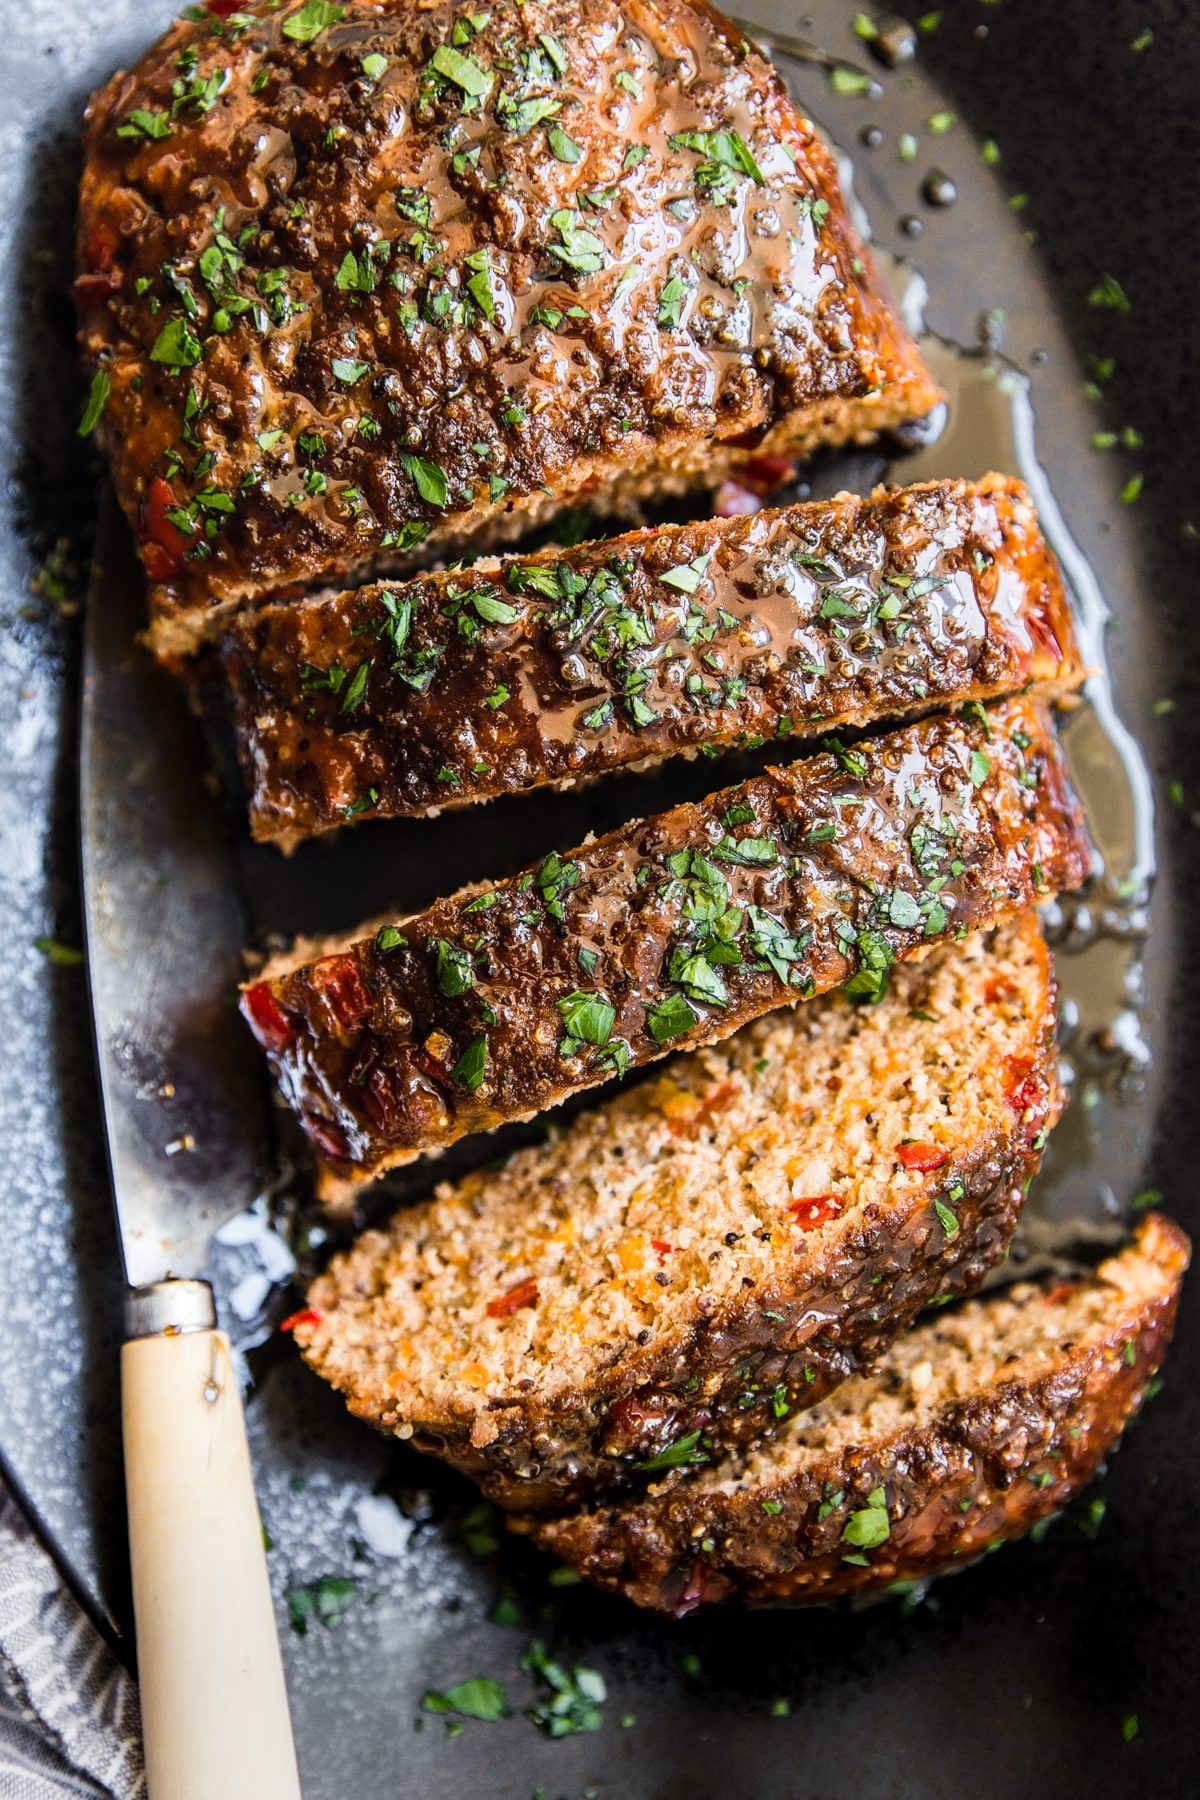 Turkey quinoa meatloaf cut into slices on a plater